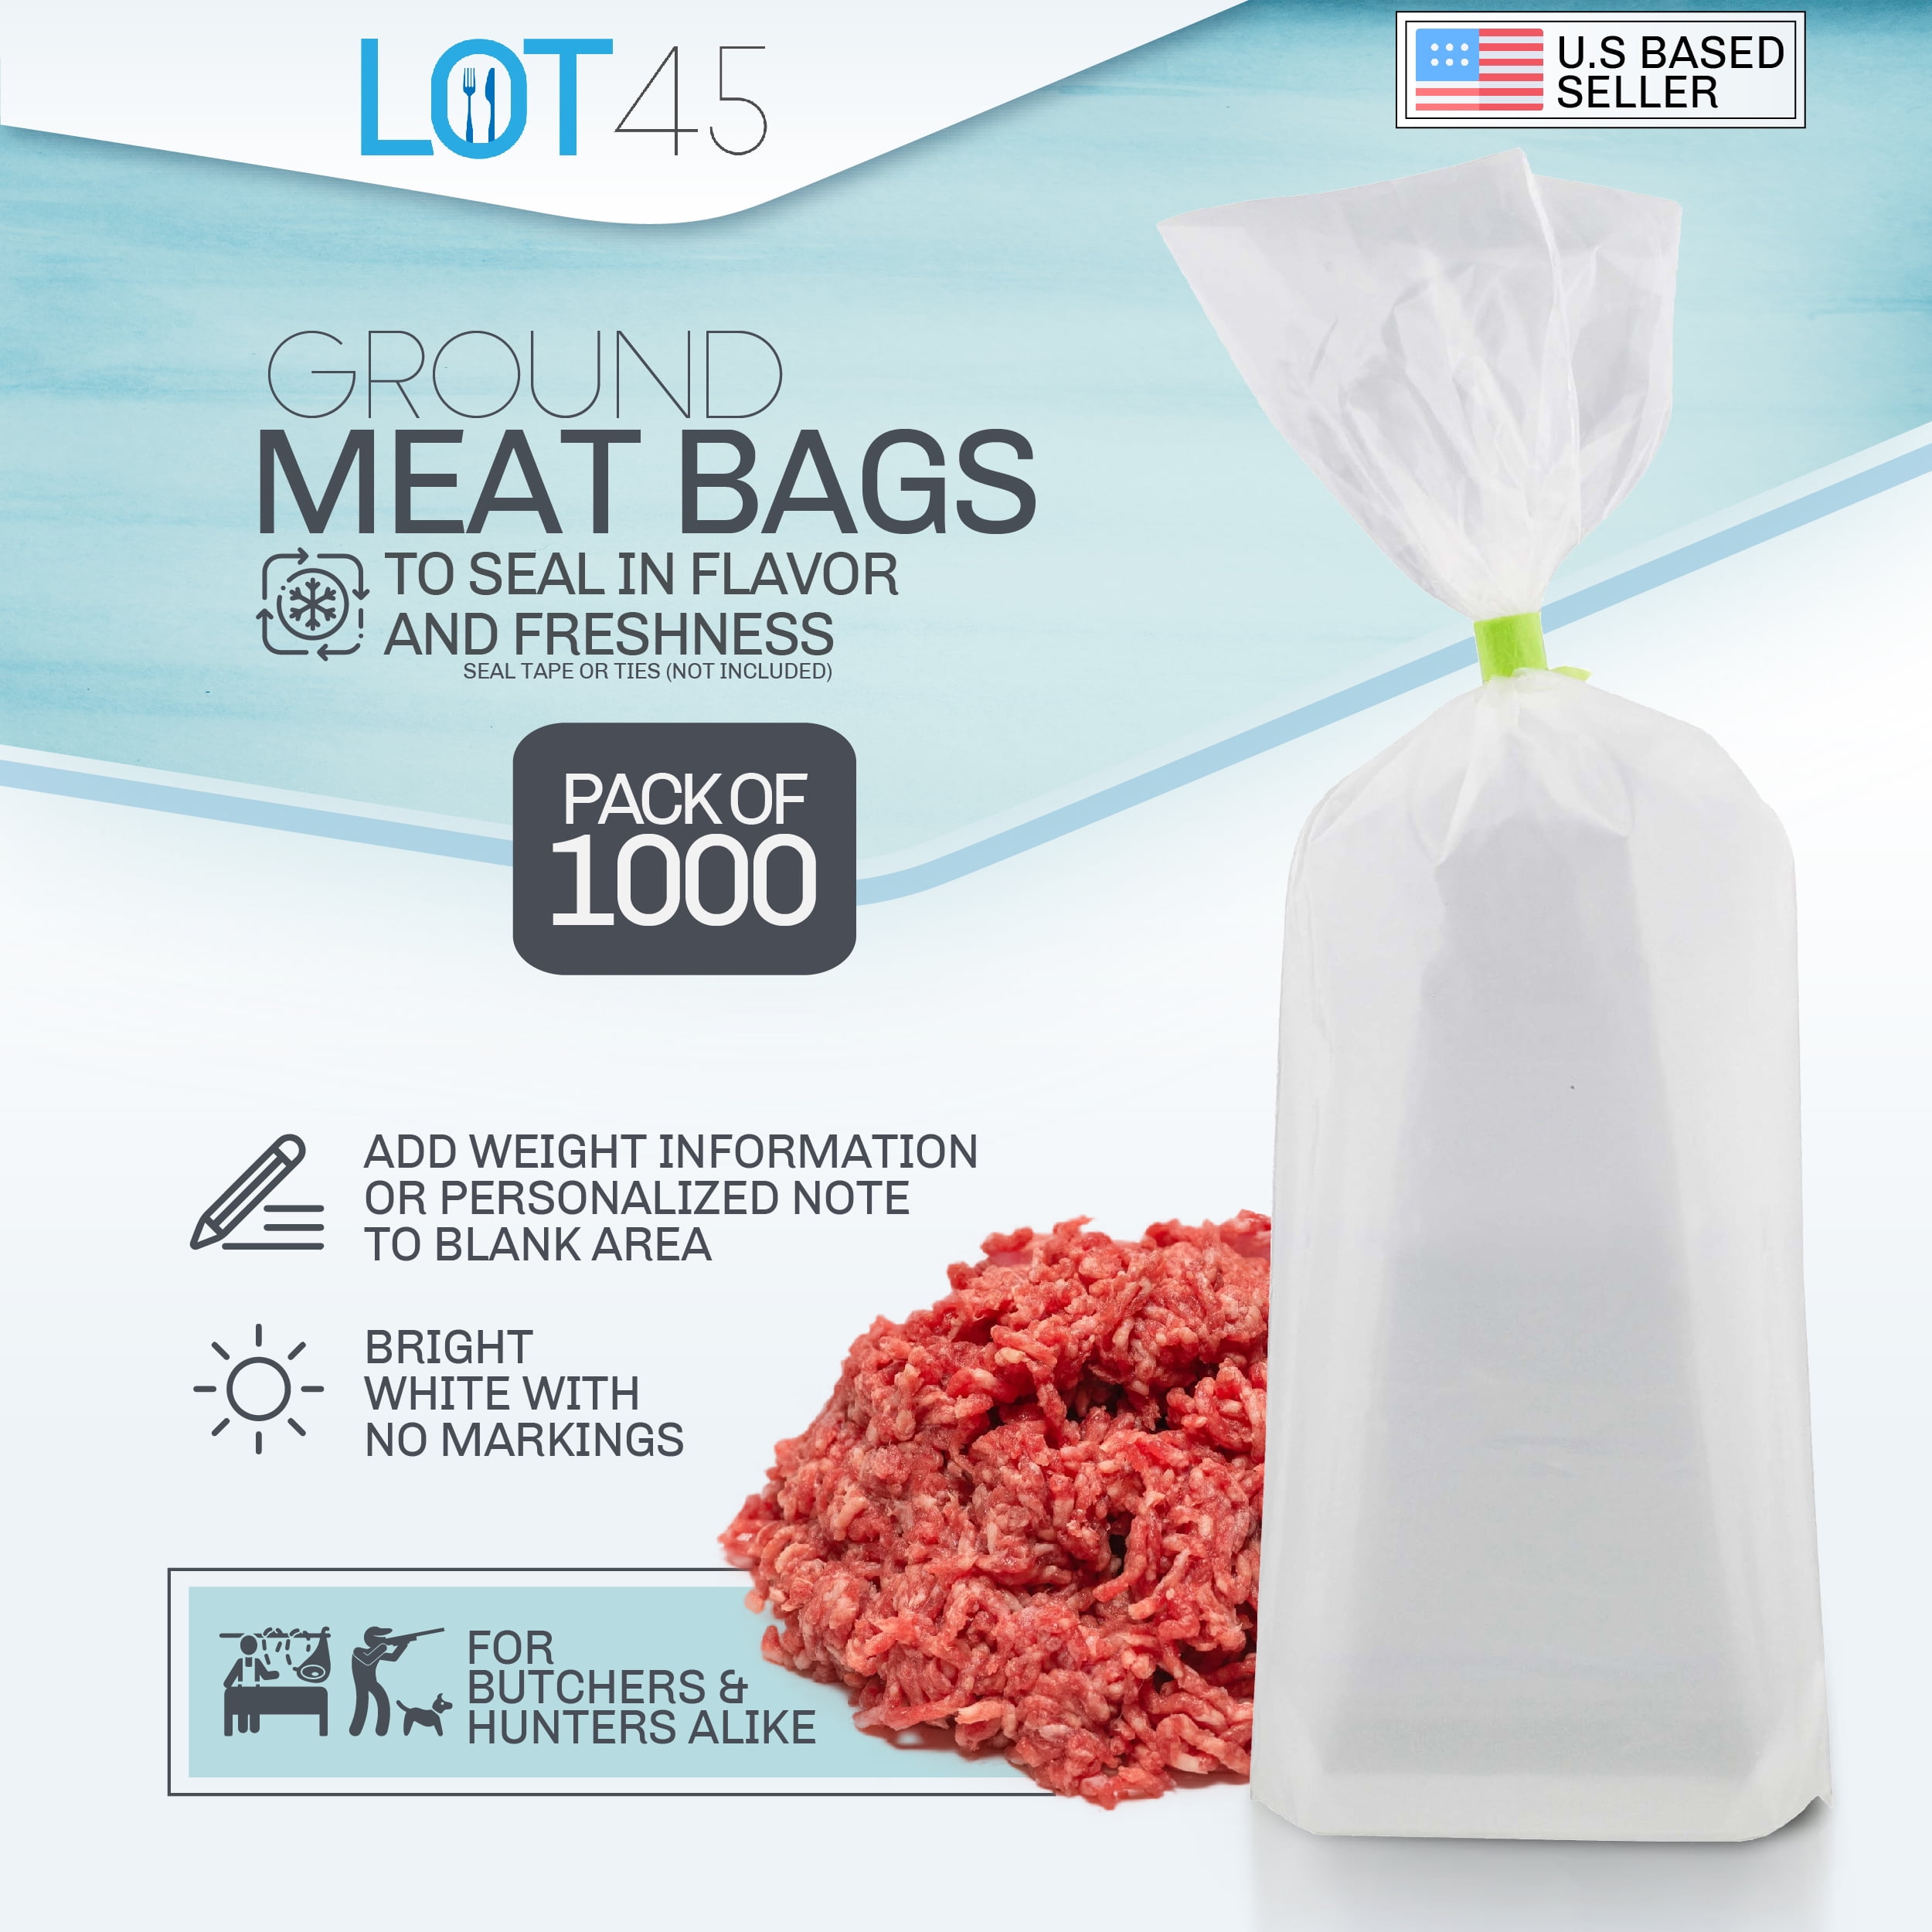 Lot45 Ground Hamburger Bags 1lb - 1000pk Clear Wild Game Meat